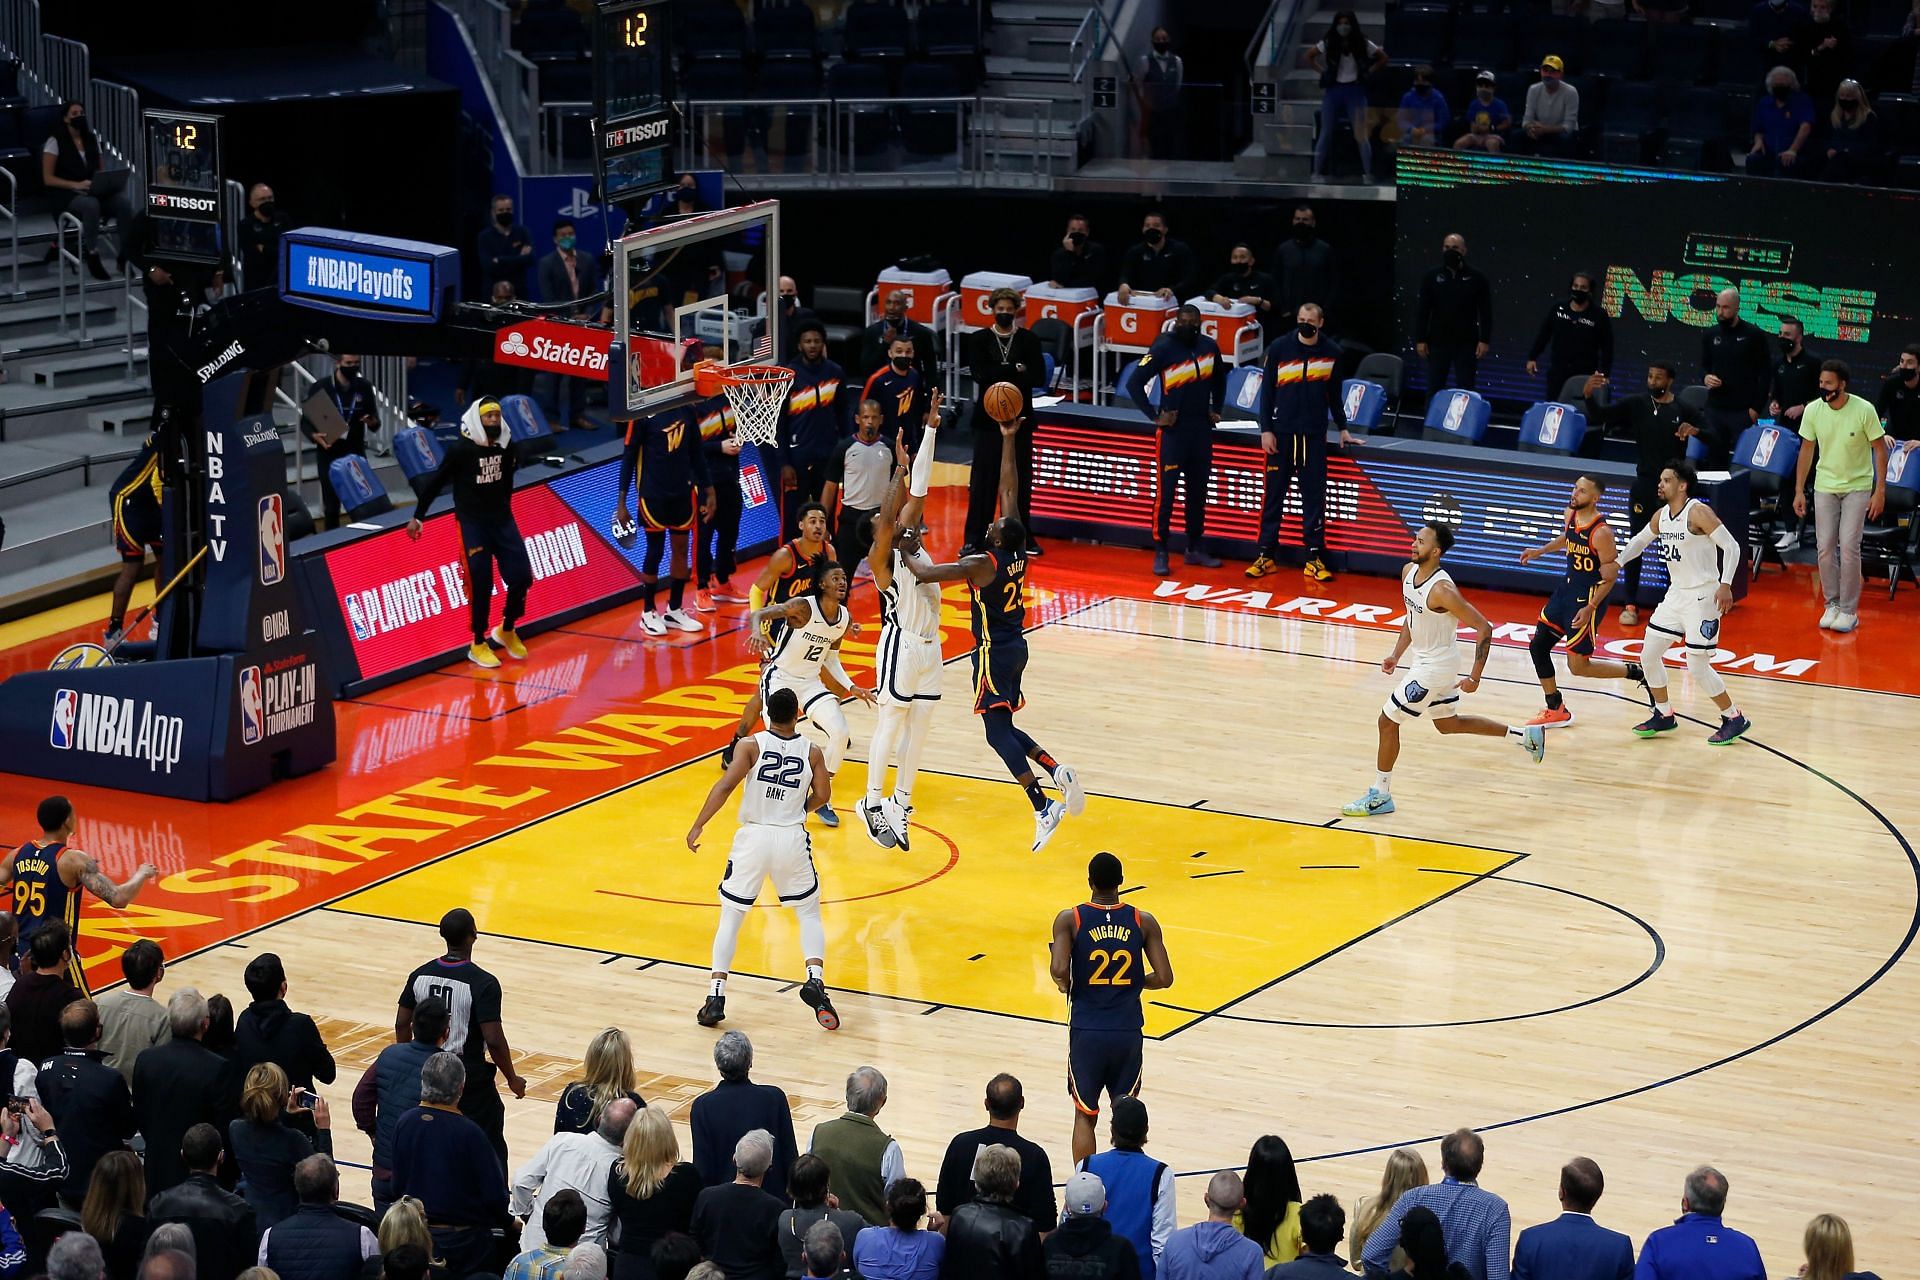 The Golden State Warriors will host the Memphis Grizzlies to begin their eight-game home stand.